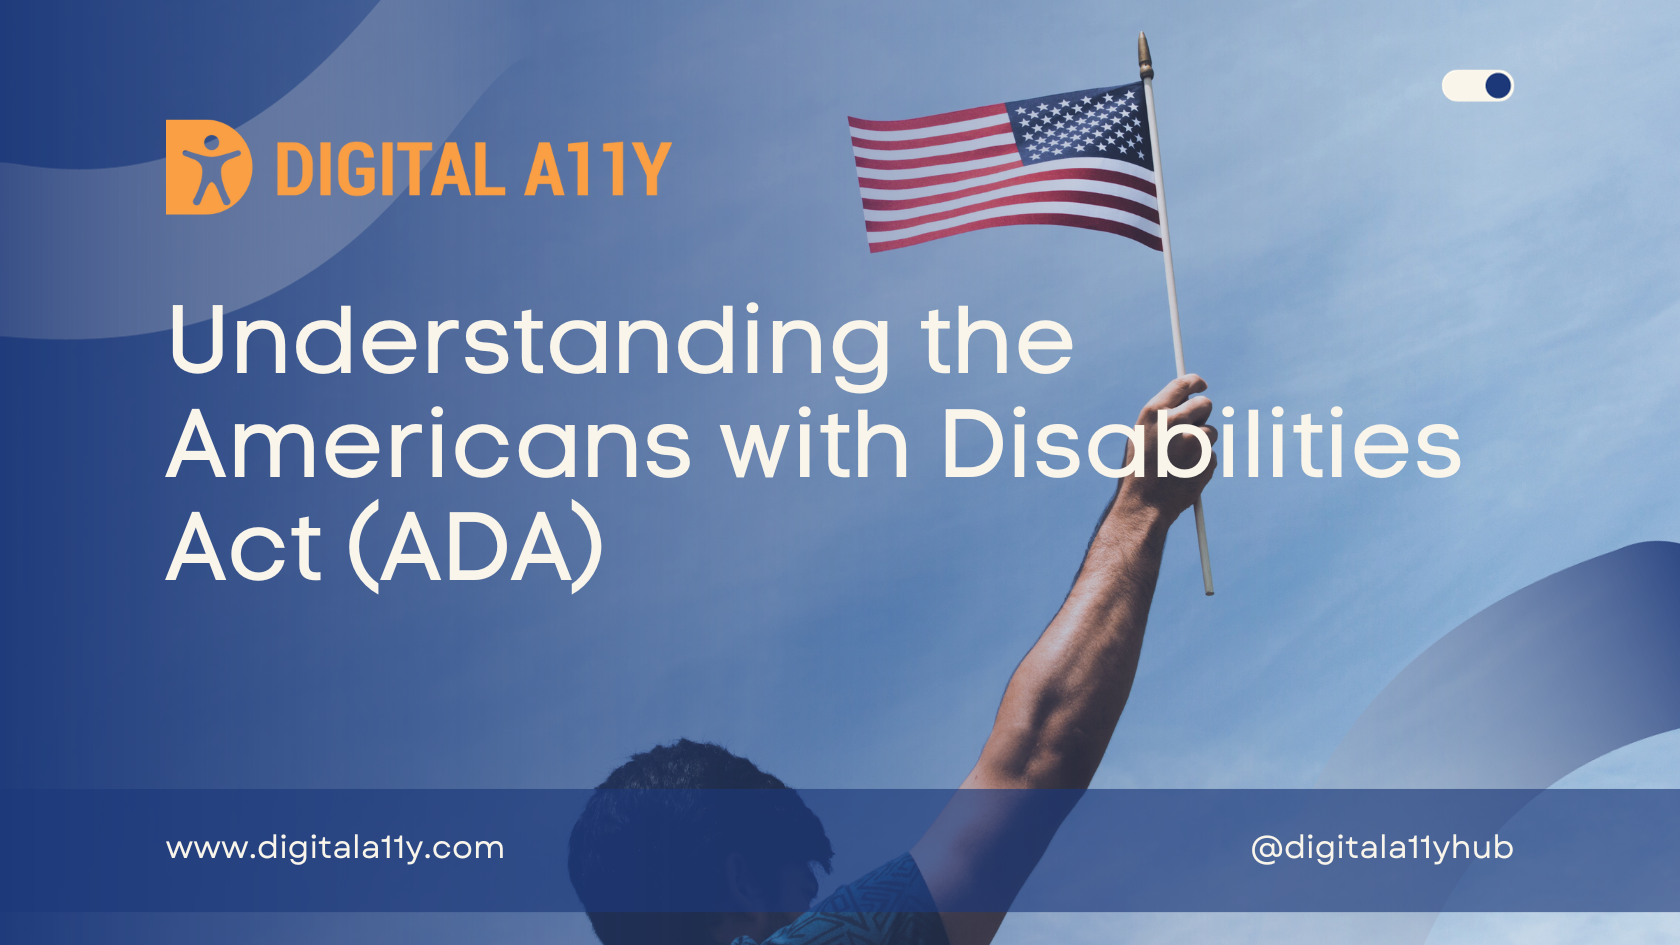 Understanding the Americans with Disabilities Act (ADA)